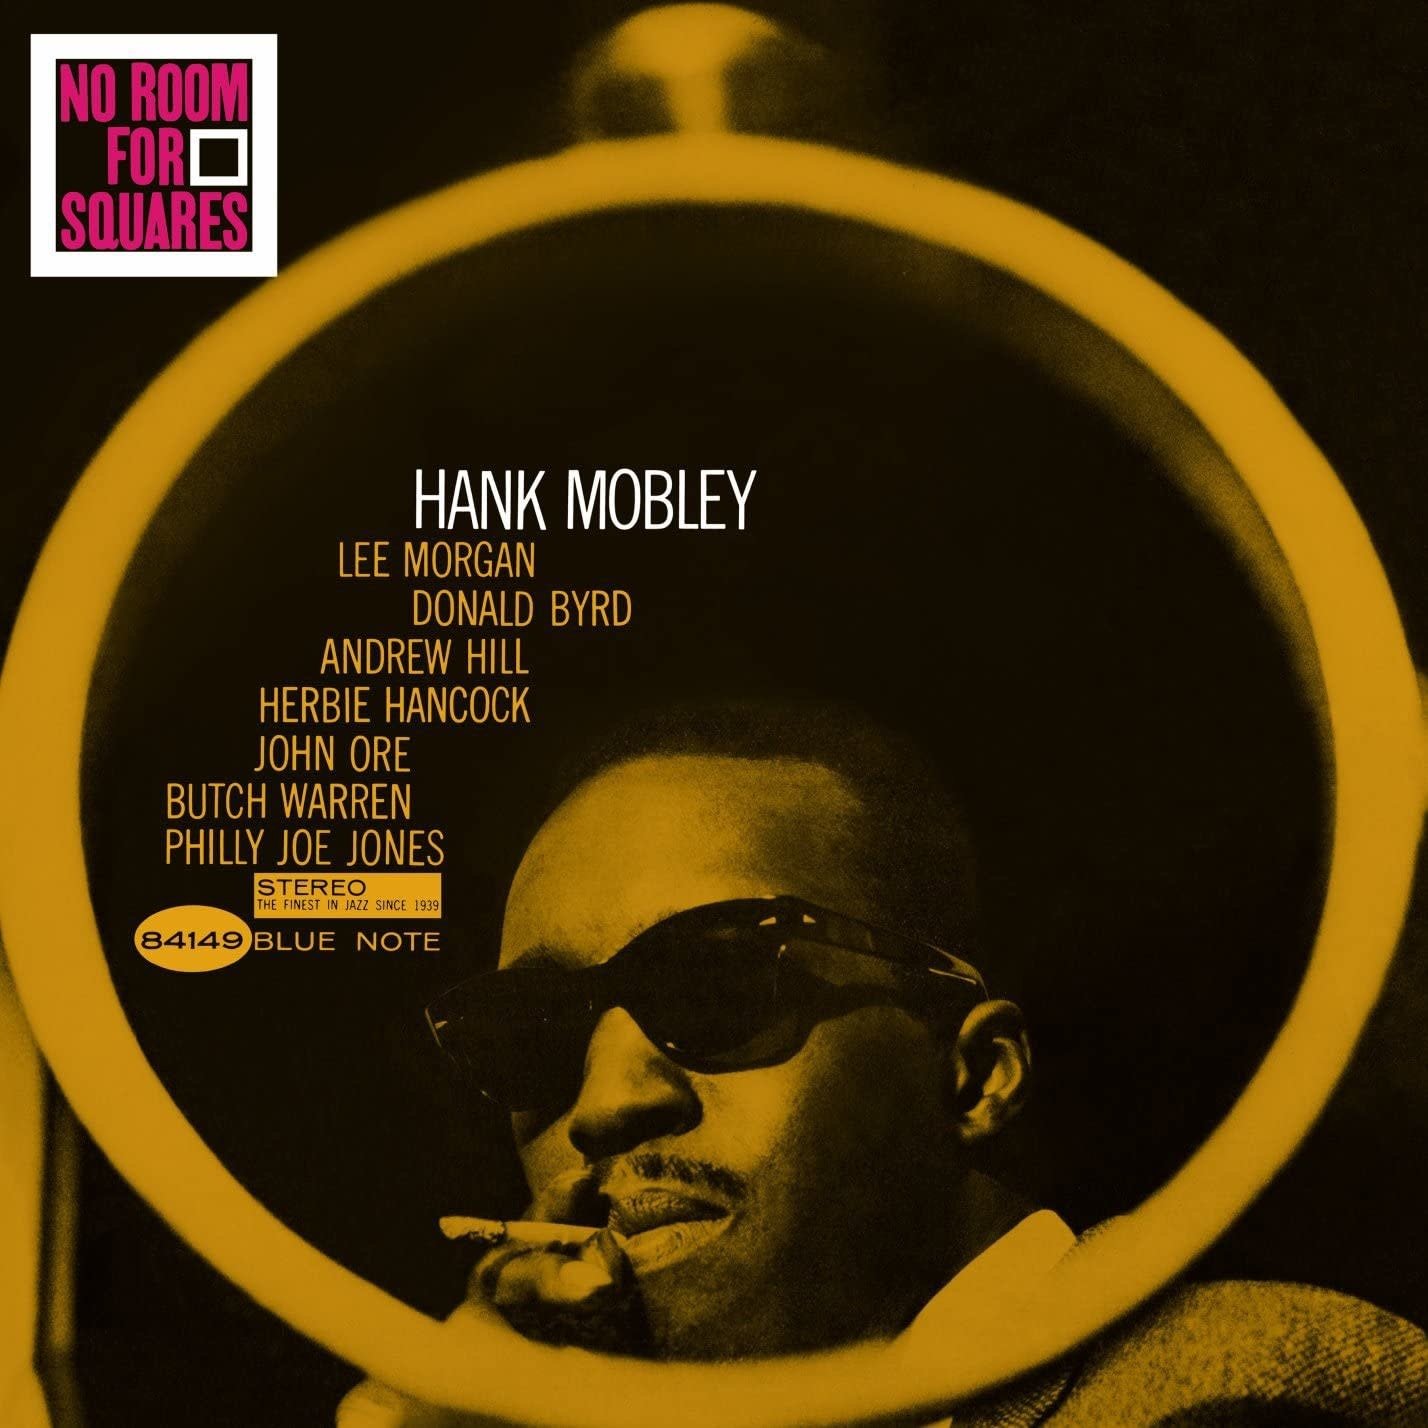 Hank Mobley ‎– No Room For Squares